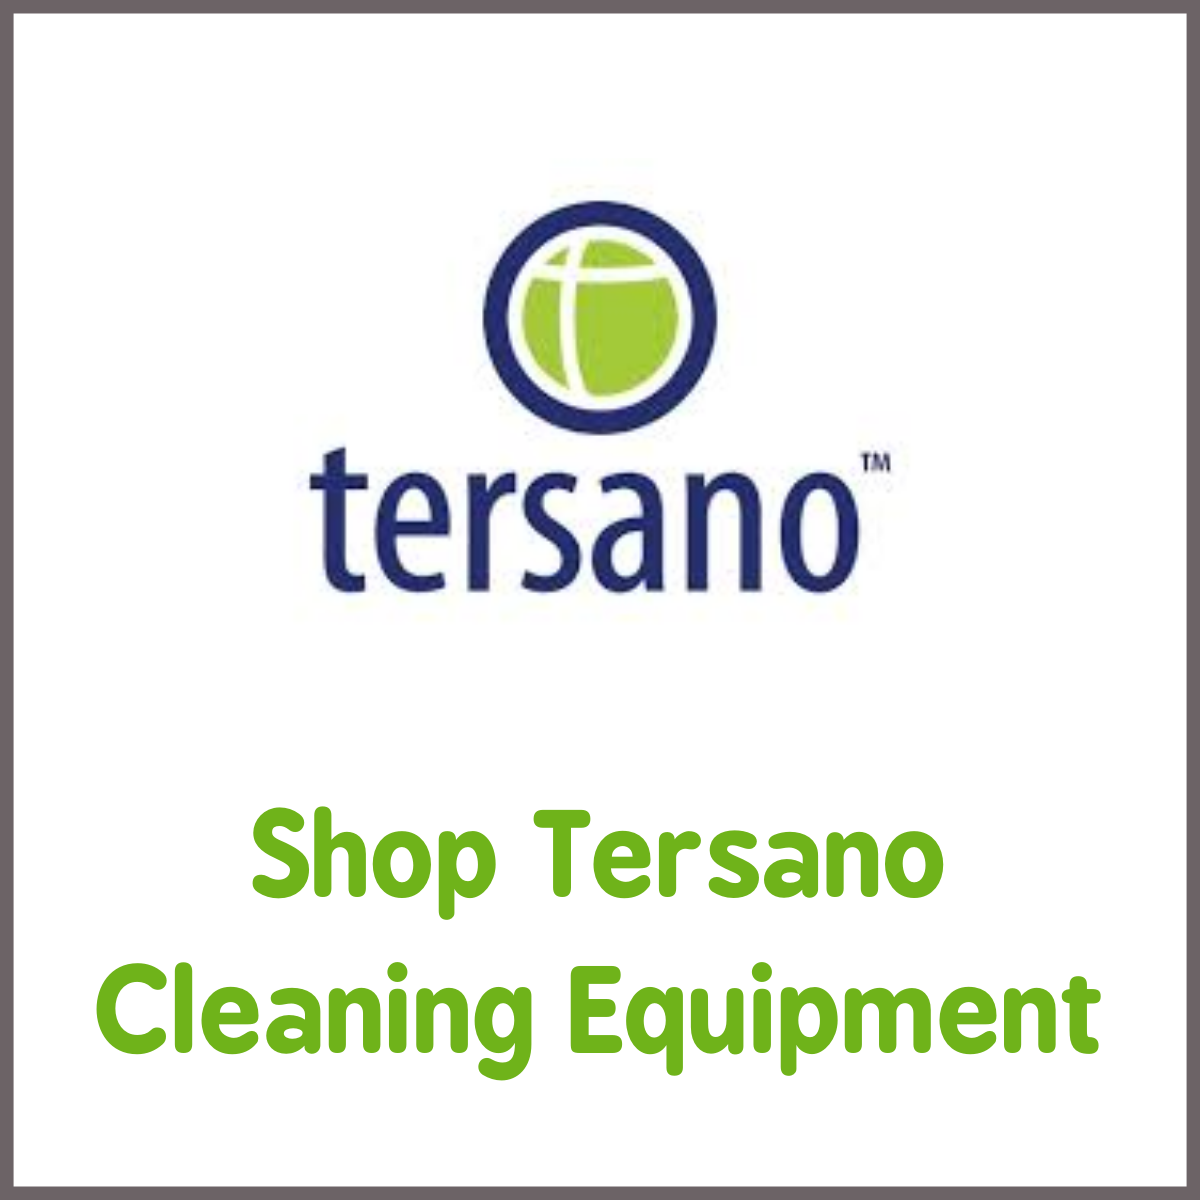 Clenli Direct - Shop All Tersano Cleaning Equipment